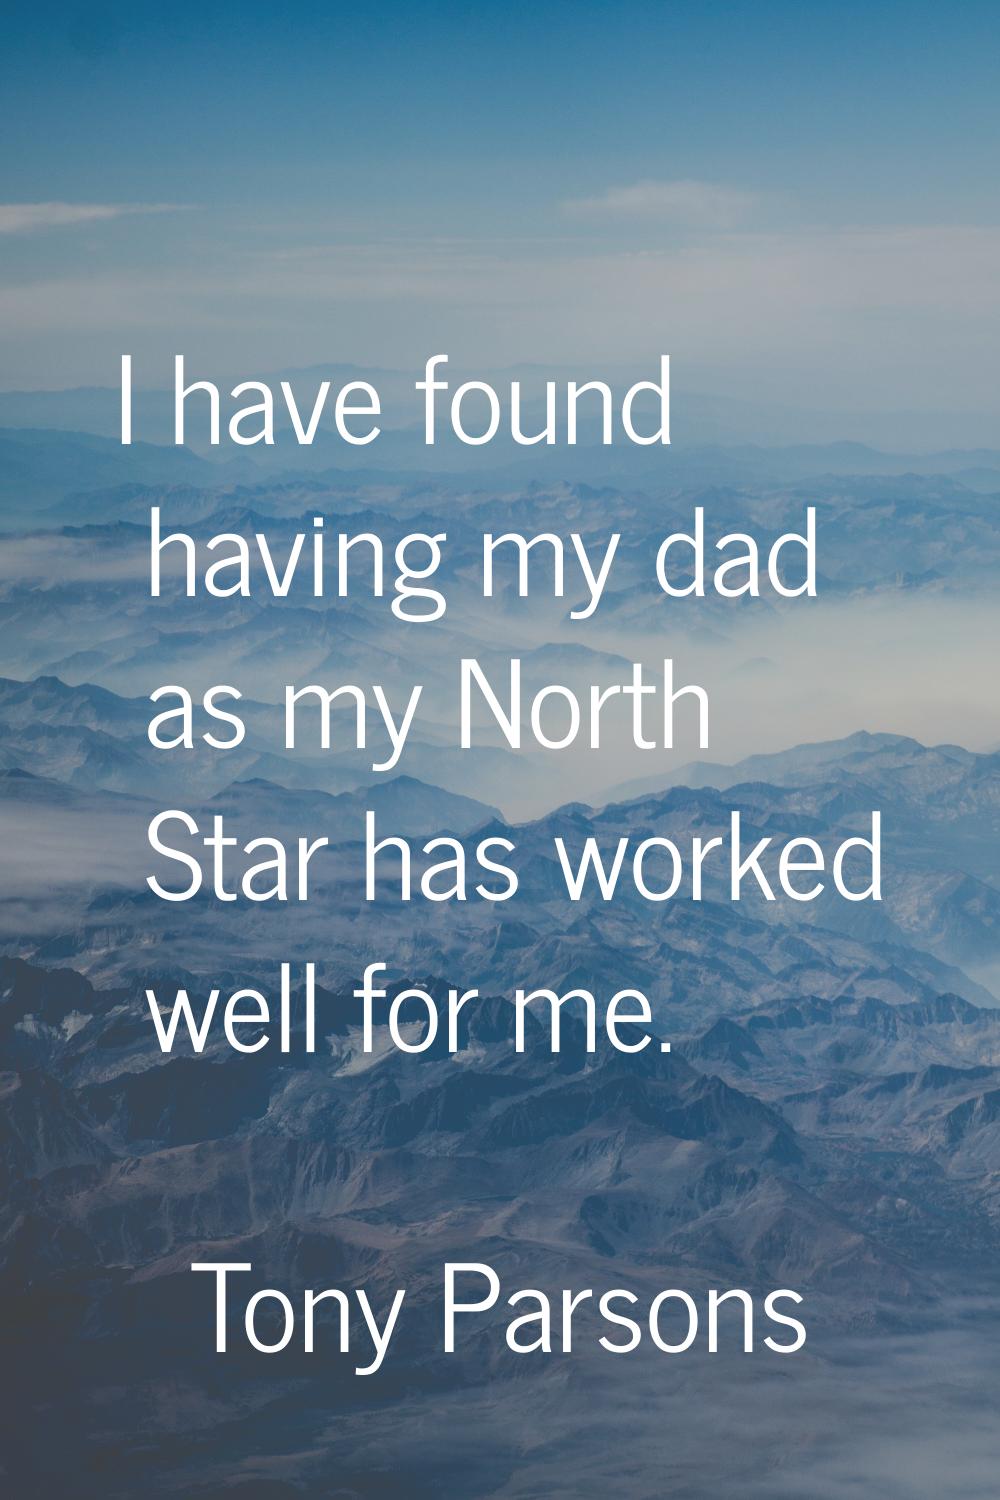 I have found having my dad as my North Star has worked well for me.